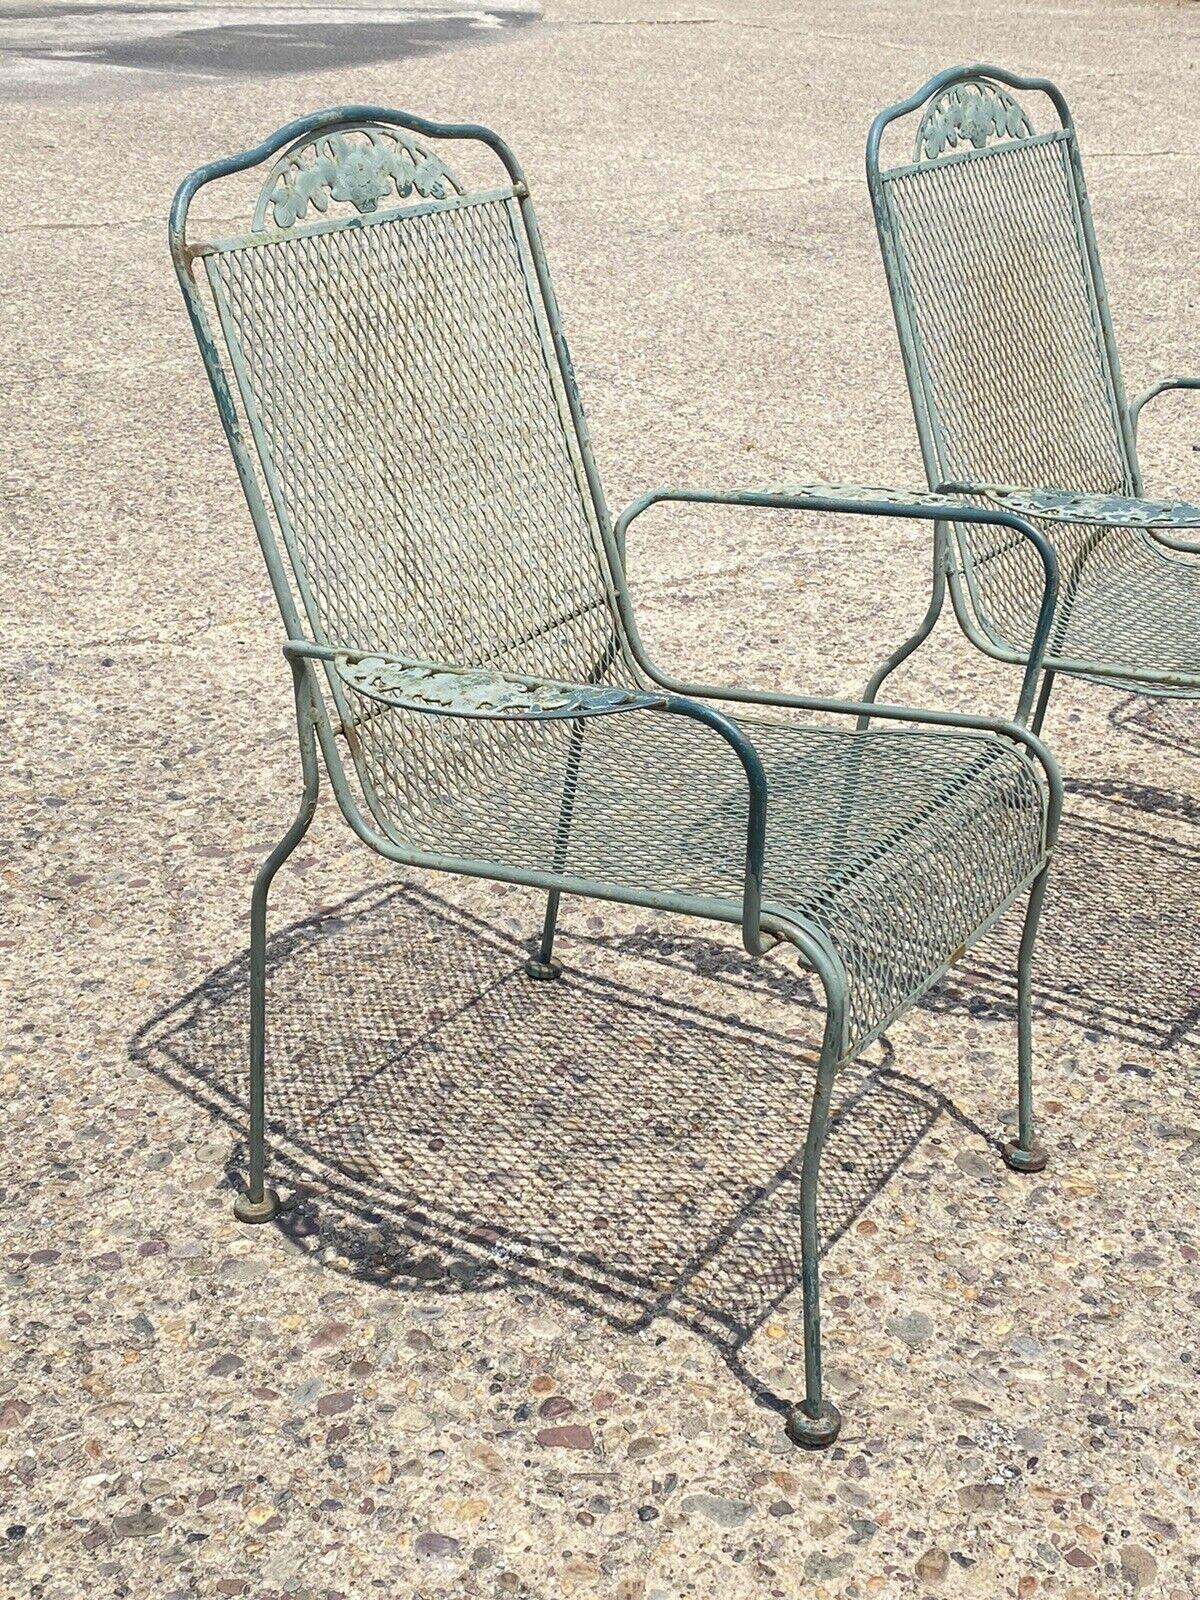 Victorian Vintage Meadowcraft Dogwood Green Wrought Iron Outdoor Patio Chairs, Set of 4